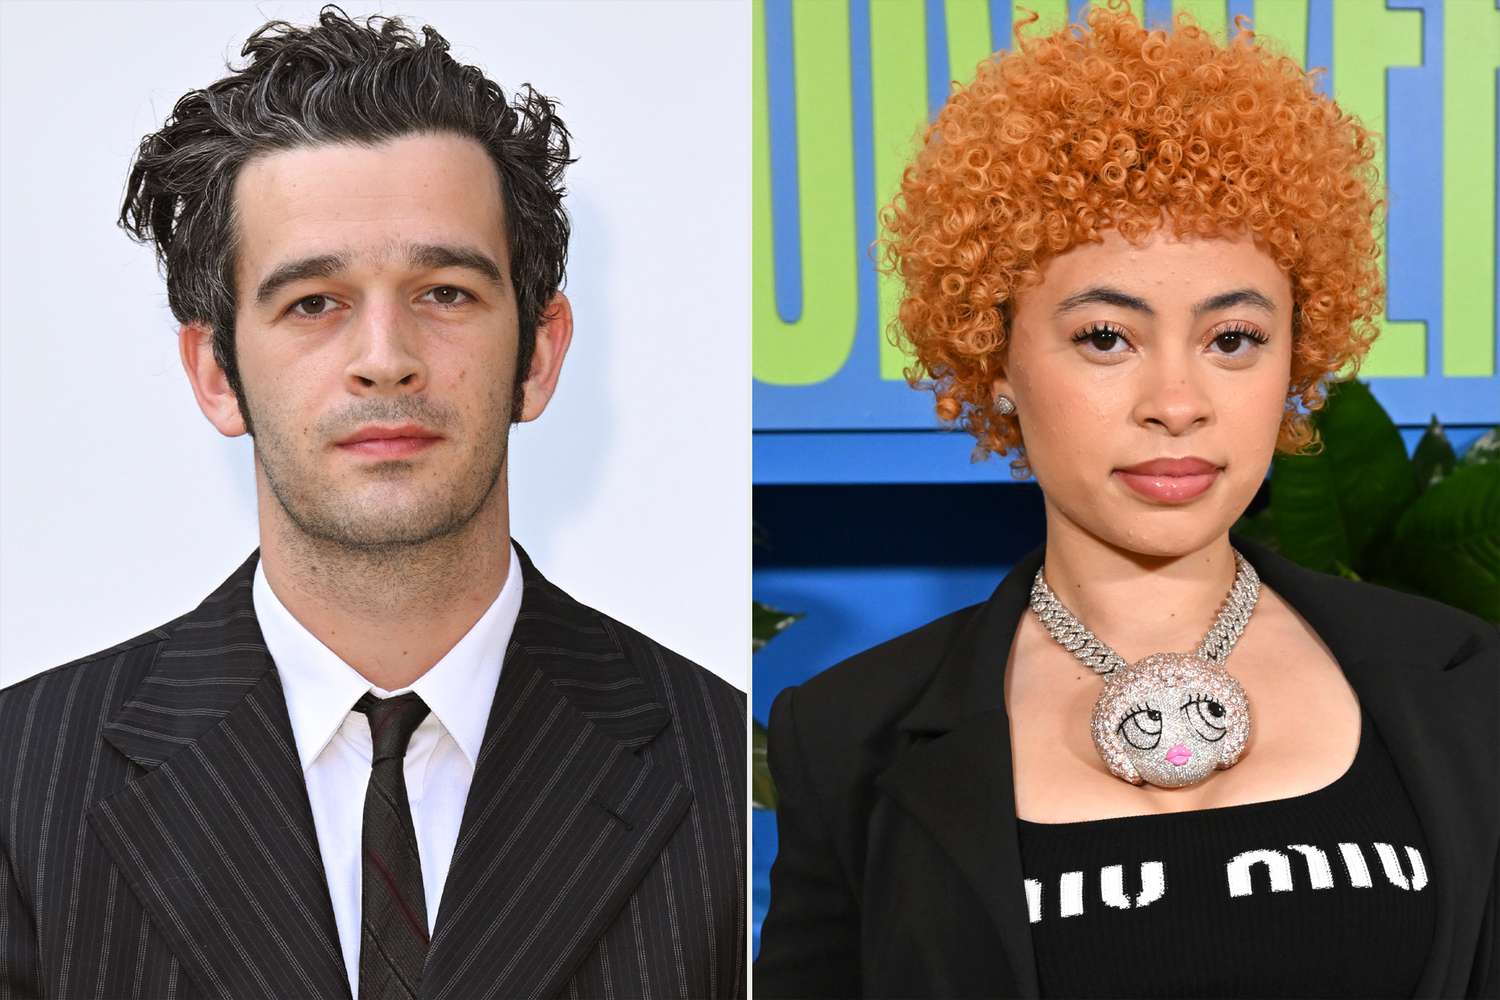 Matthew Healy attends the Royal Academy of Arts summer preview party at Royal Academy of Arts on June 15, 2022 in London, England. (Photo by Karwai Tang/WireImage); Ice Spice attends Sir Lucian Grainge’s 2023 Artist Showcase, Presented By Merz Aesthestics’ Xperience+ and Coke Studio” at Milk Studios Los Angeles on February 04, 2023 in Los Angeles, California. (Photo by Lester Cohen/Getty Images for Universal Music Group)